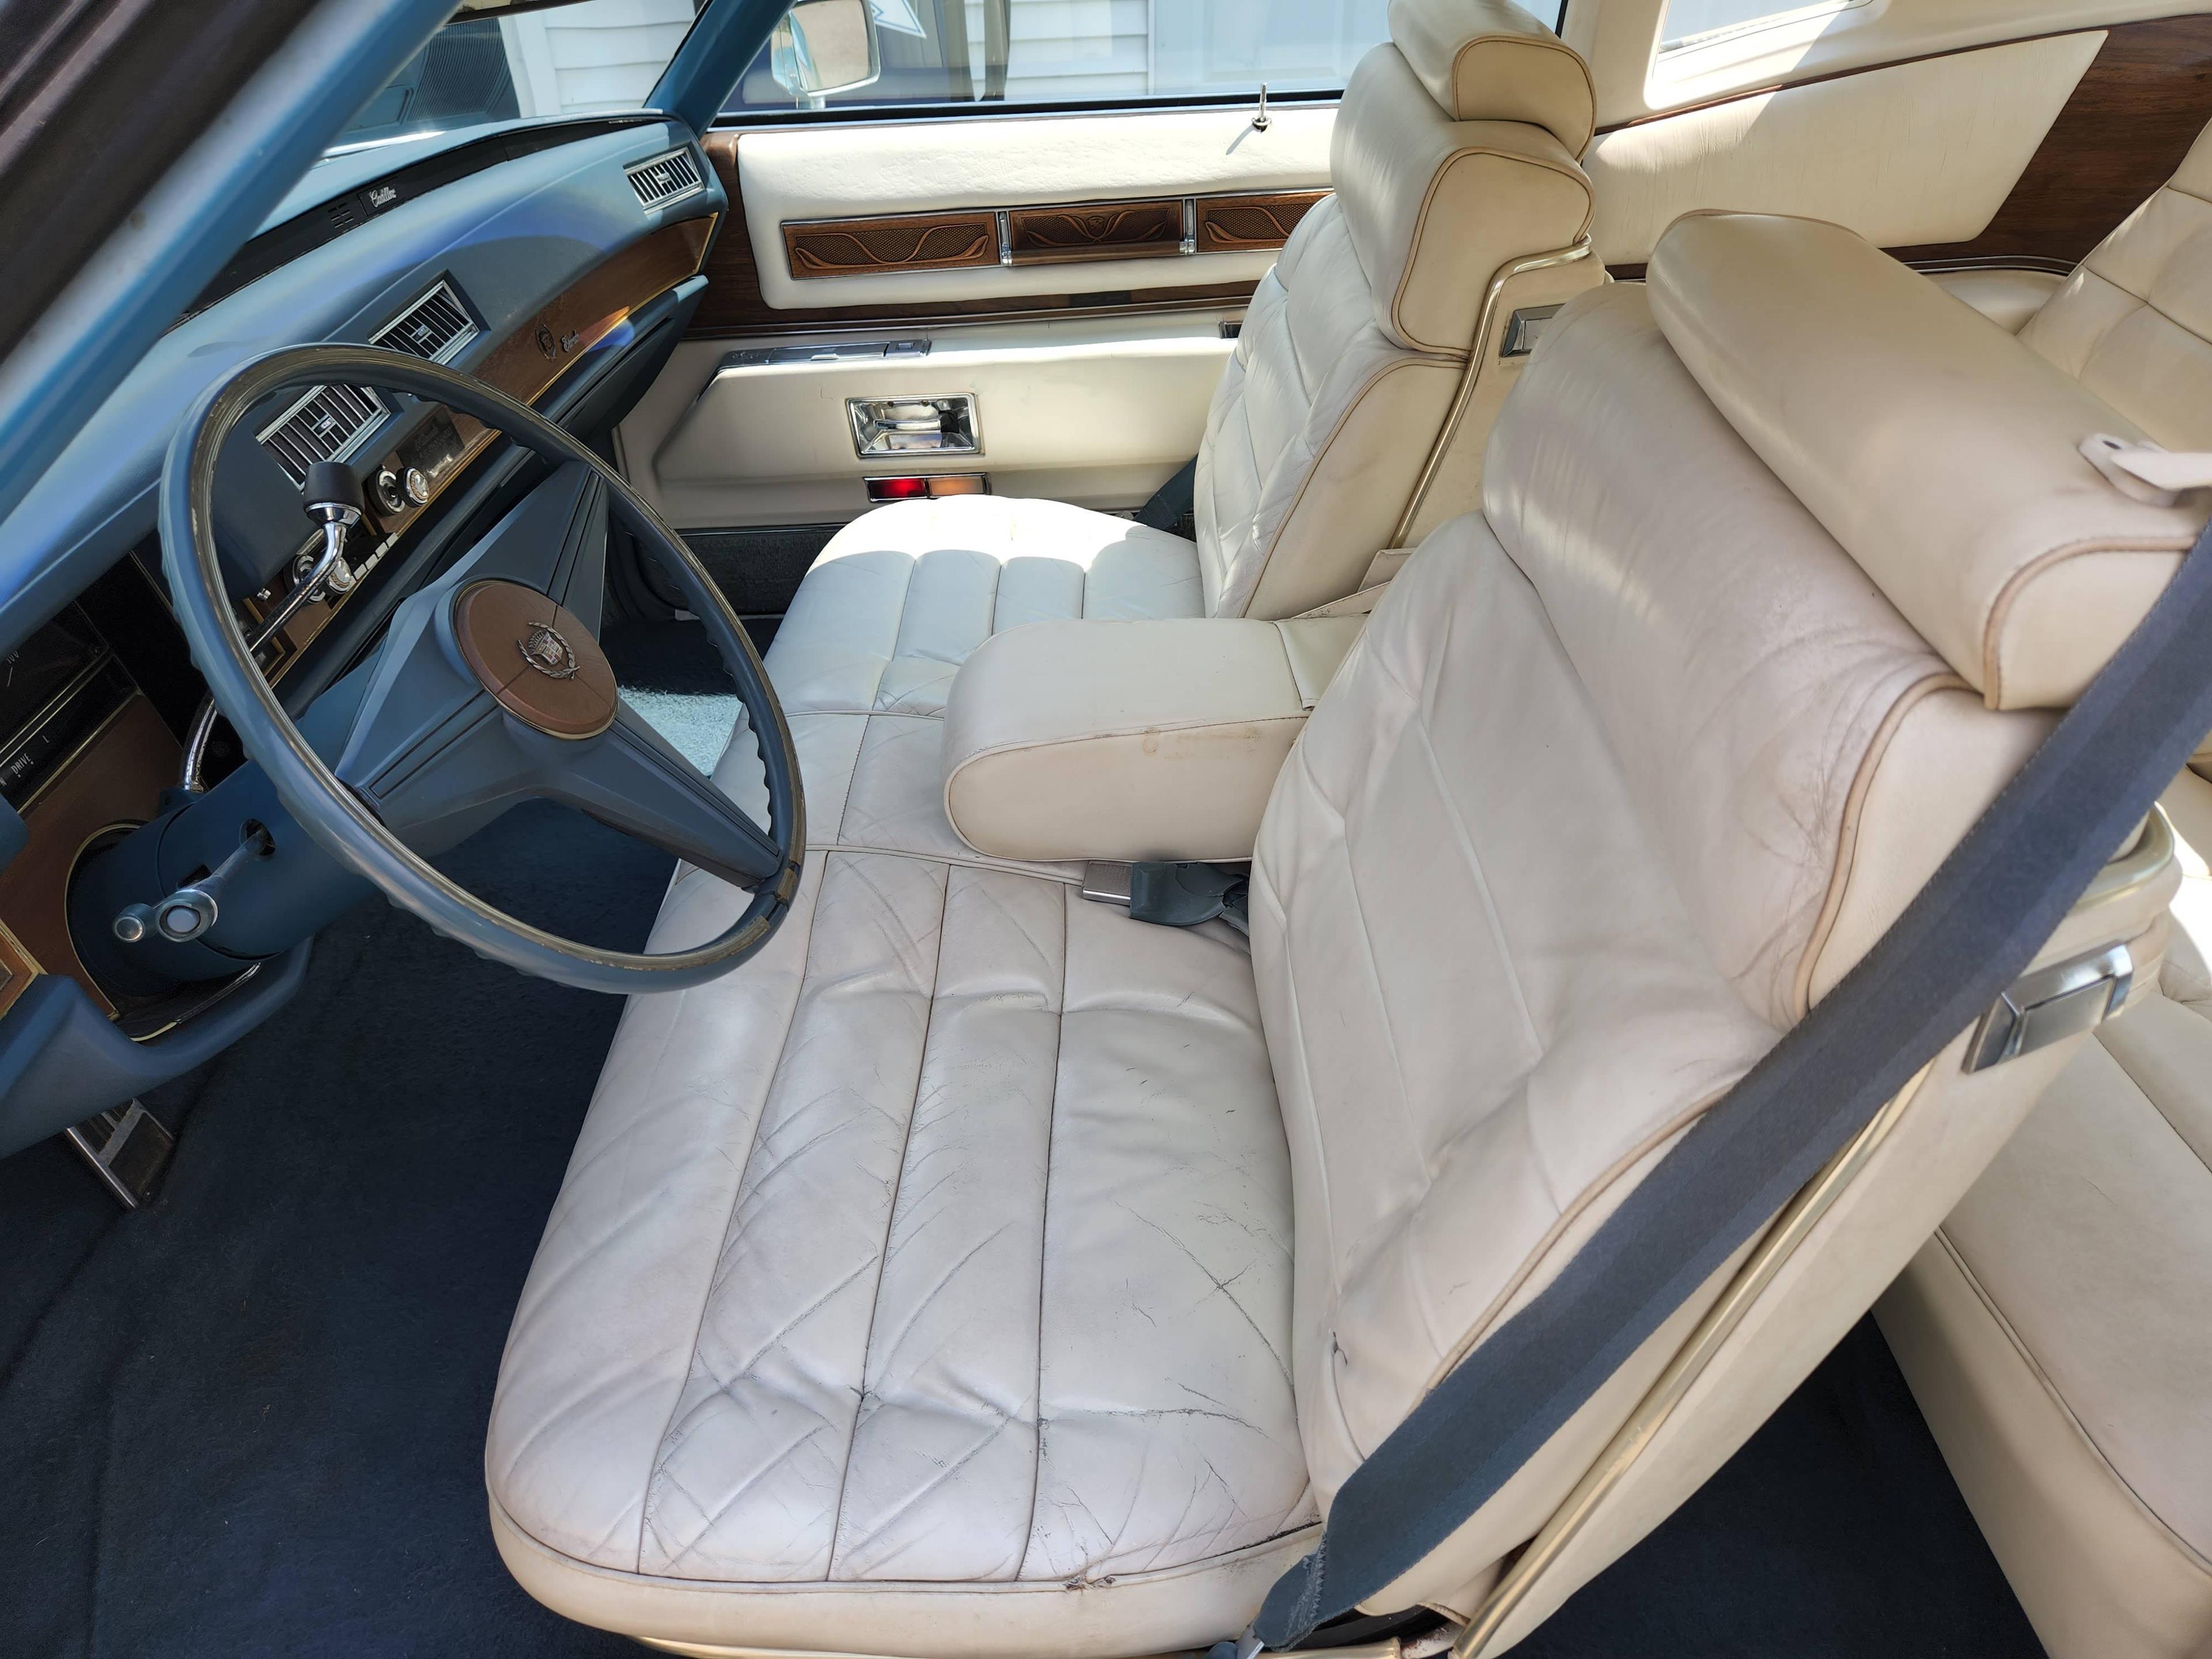 1975 Cadillac Eldorado Coupe. We purchased this from an elderly gentleman t